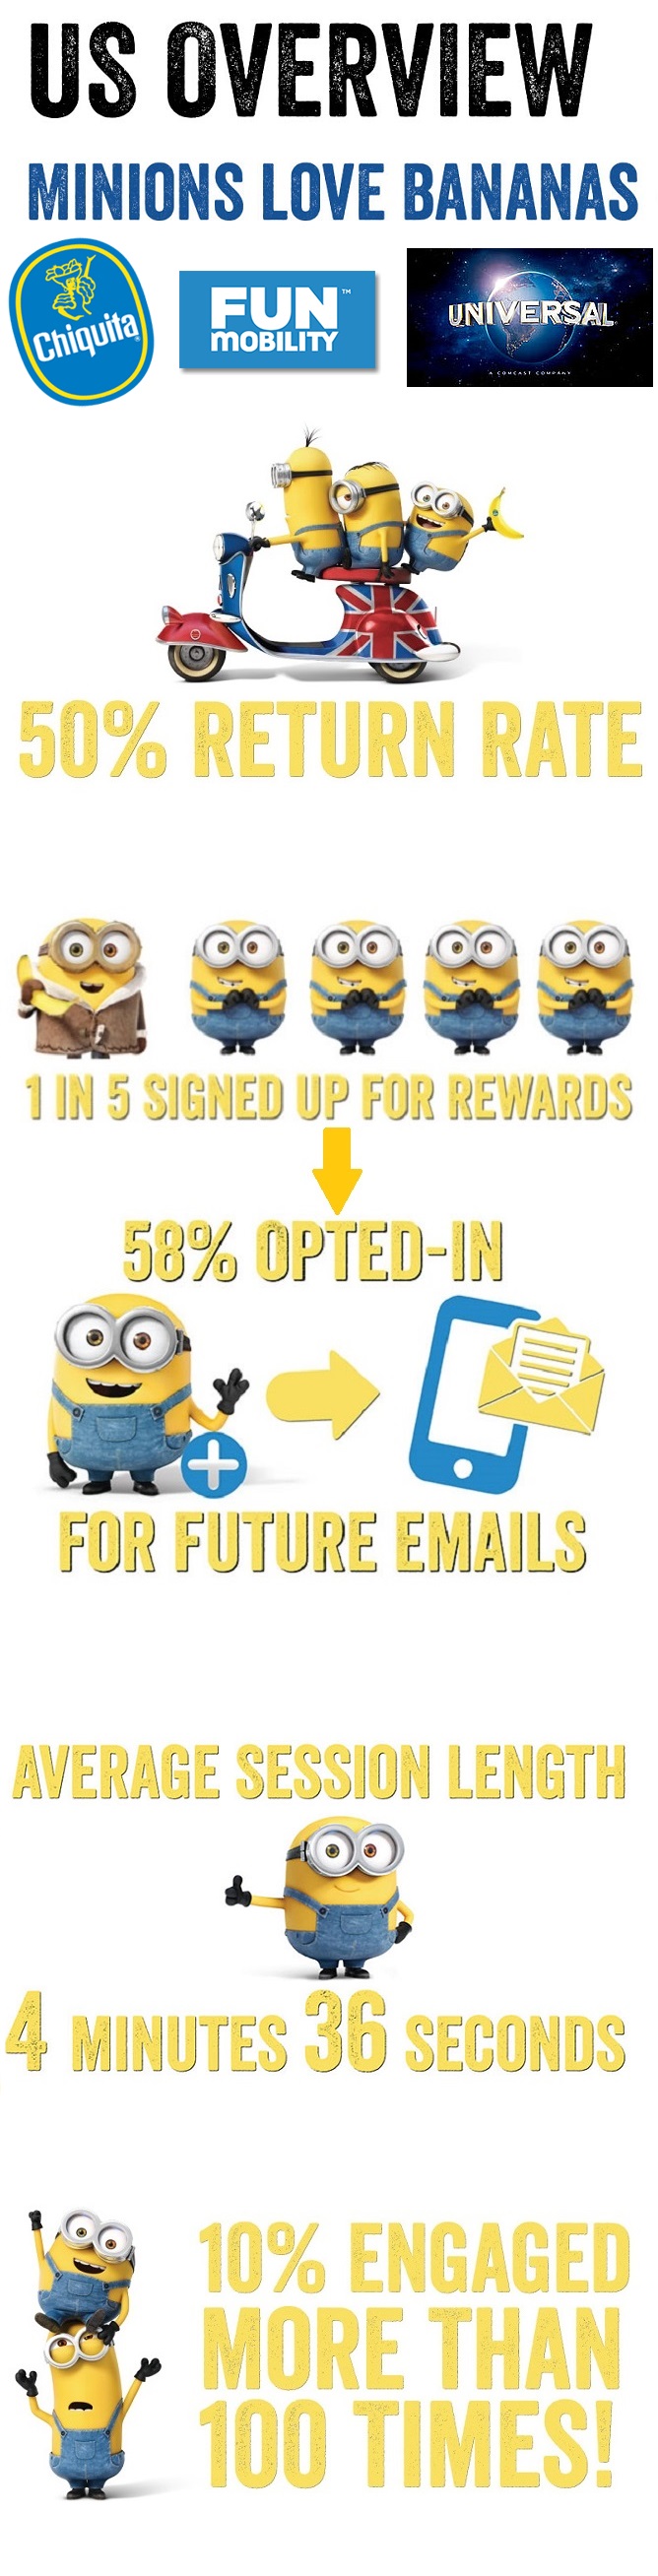 FunMobility Chiquita Minions Sweepstakes Results